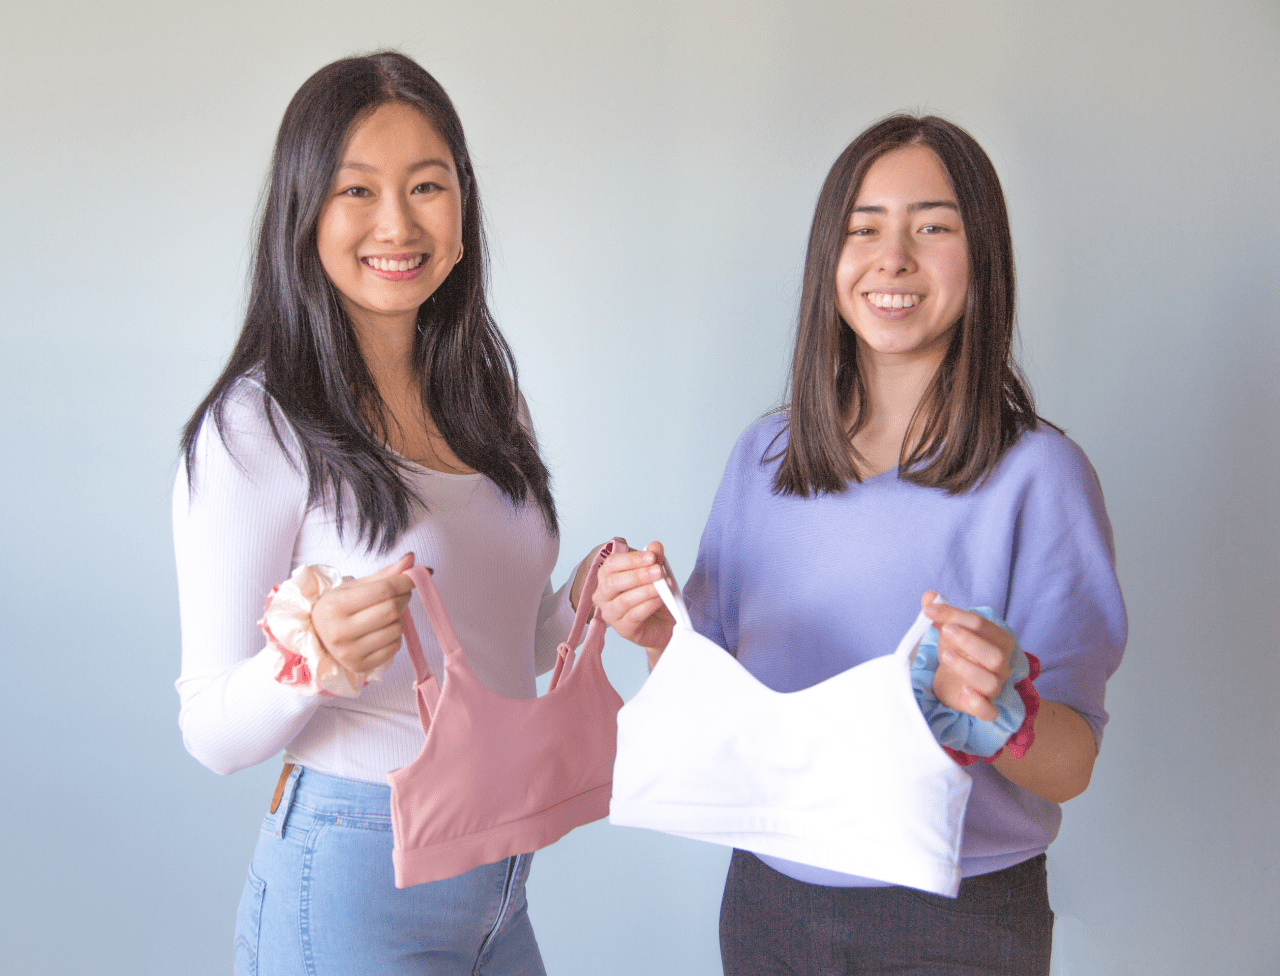 Apricotton founders holding up training bras